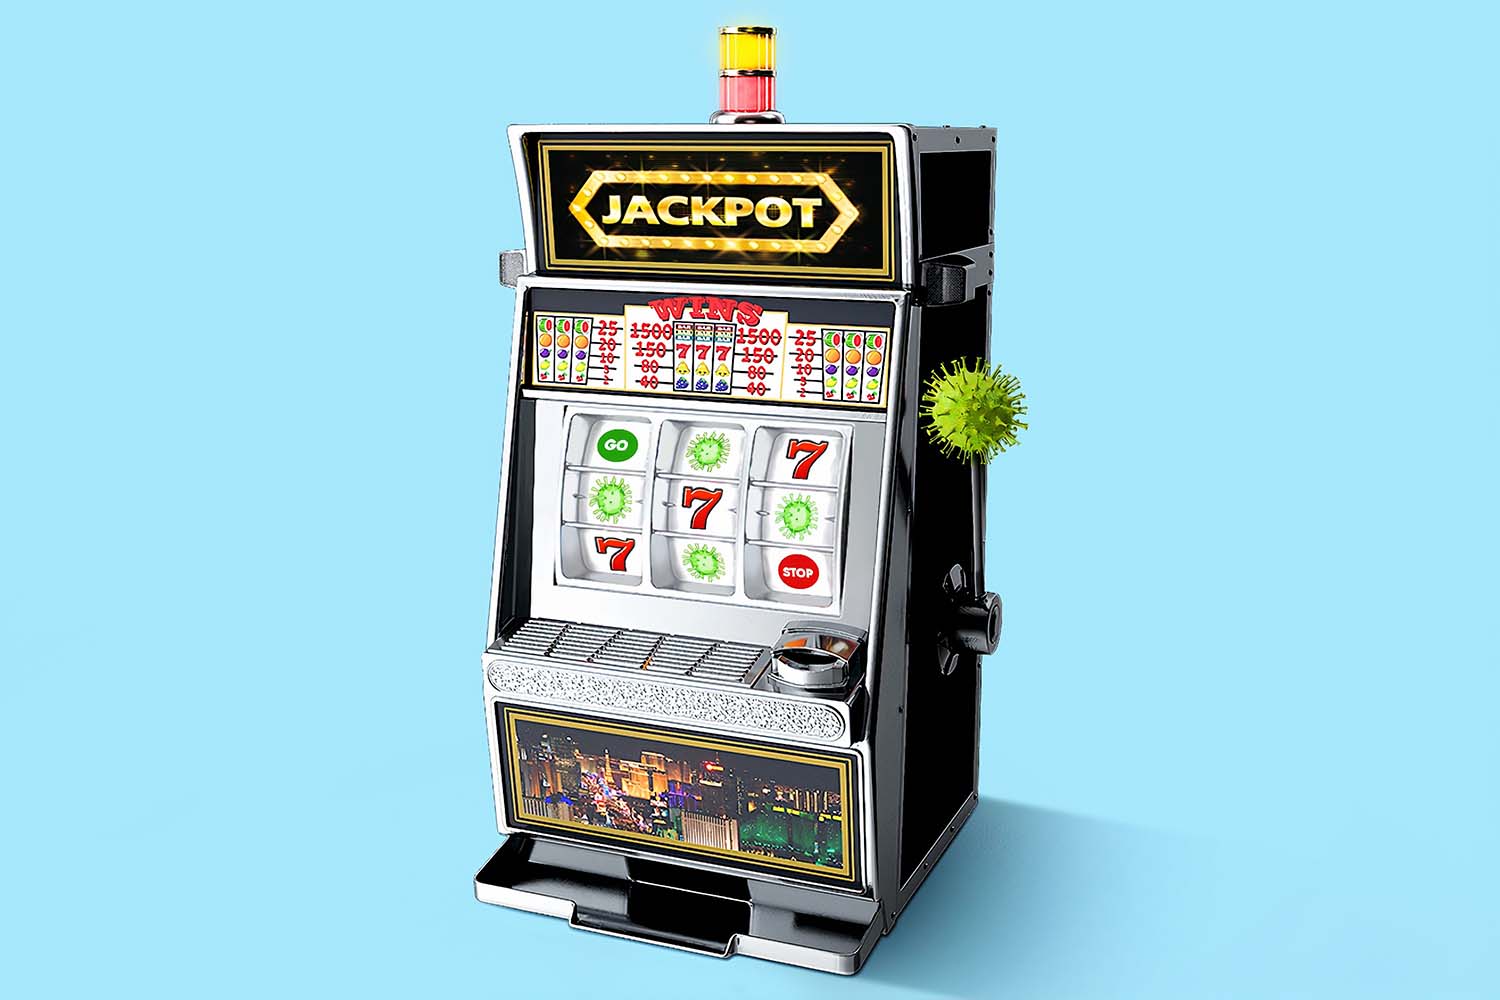 Benefits Of Playing Online Slots